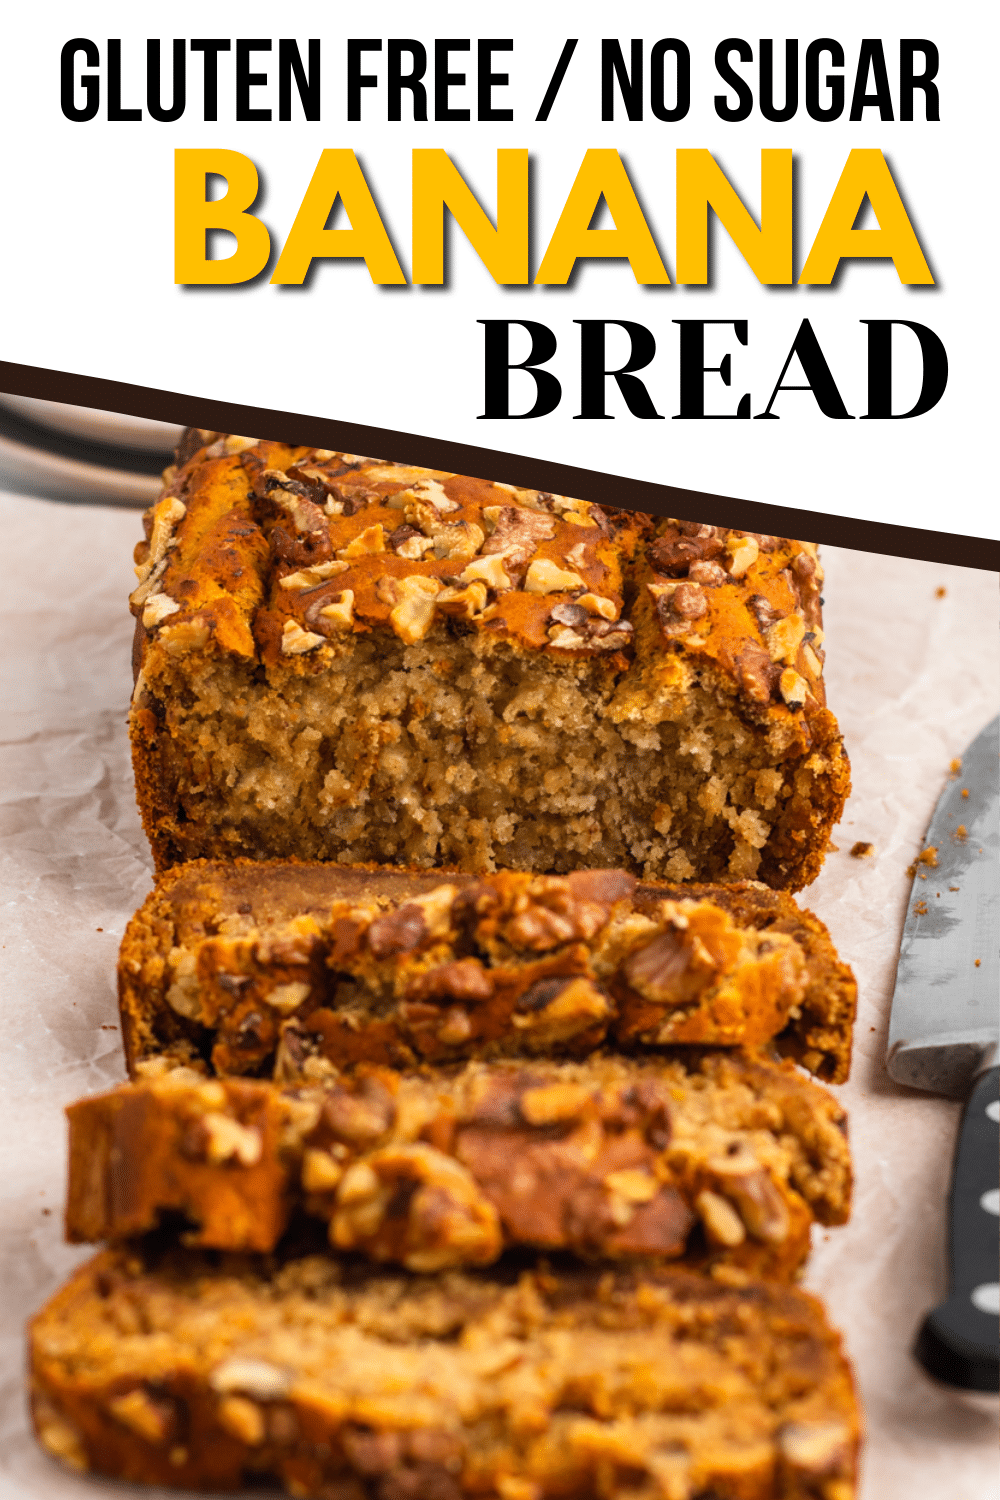 This no sugar banana bread is so moist and naturally sweet! Start your day right with a fluffy slice of gluten-free banana bread topped with crunchy walnuts.